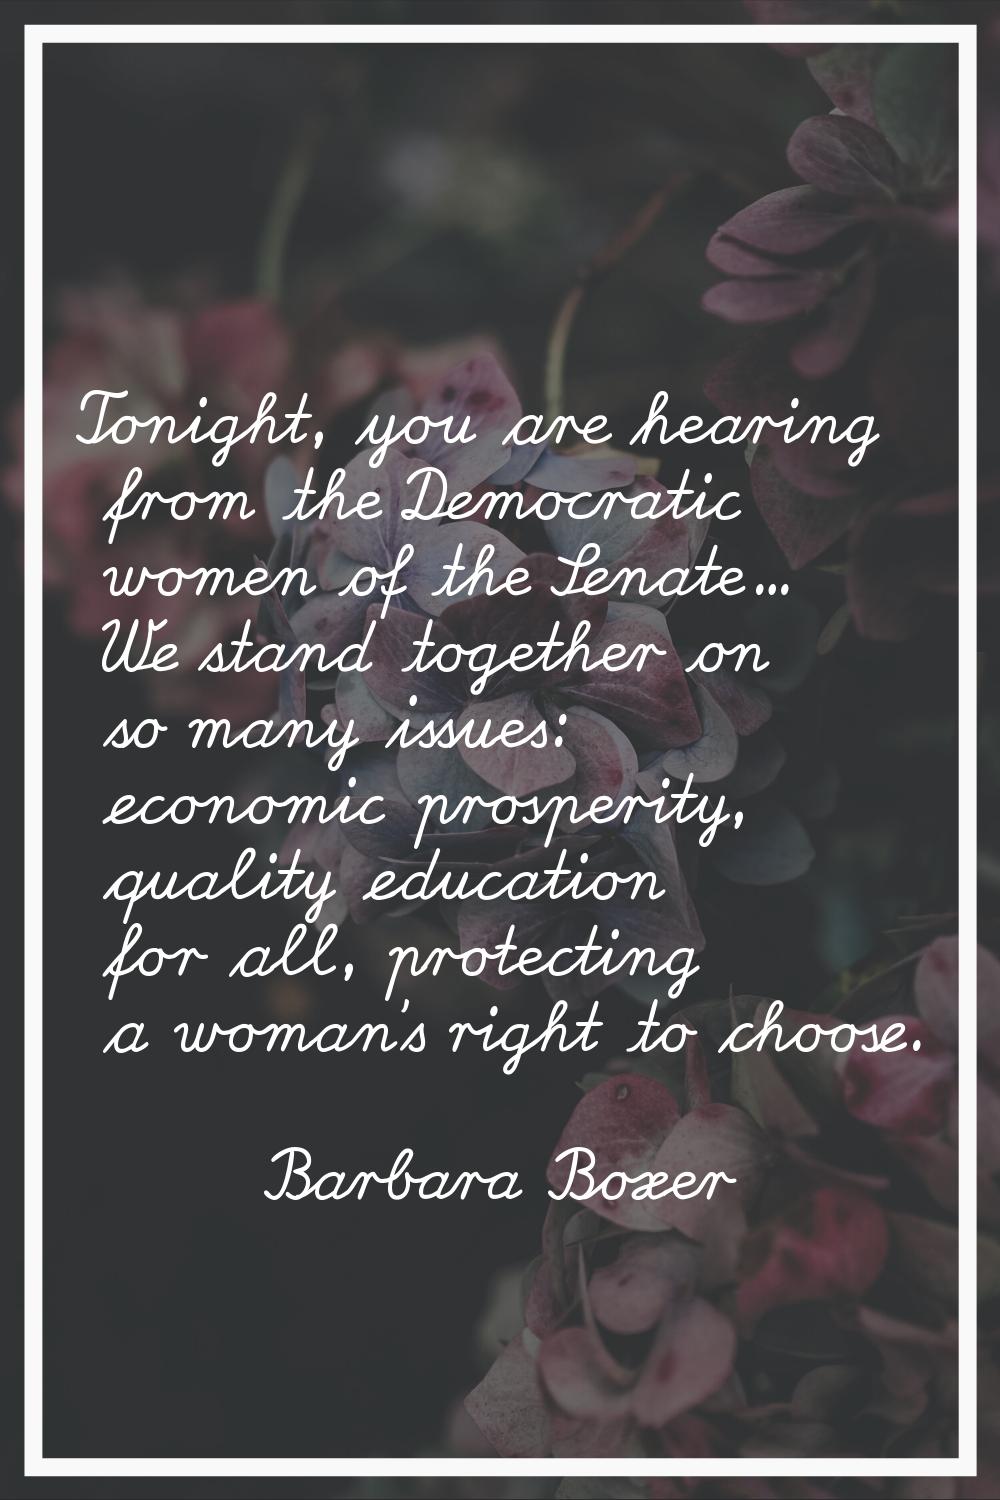 Tonight, you are hearing from the Democratic women of the Senate... We stand together on so many is